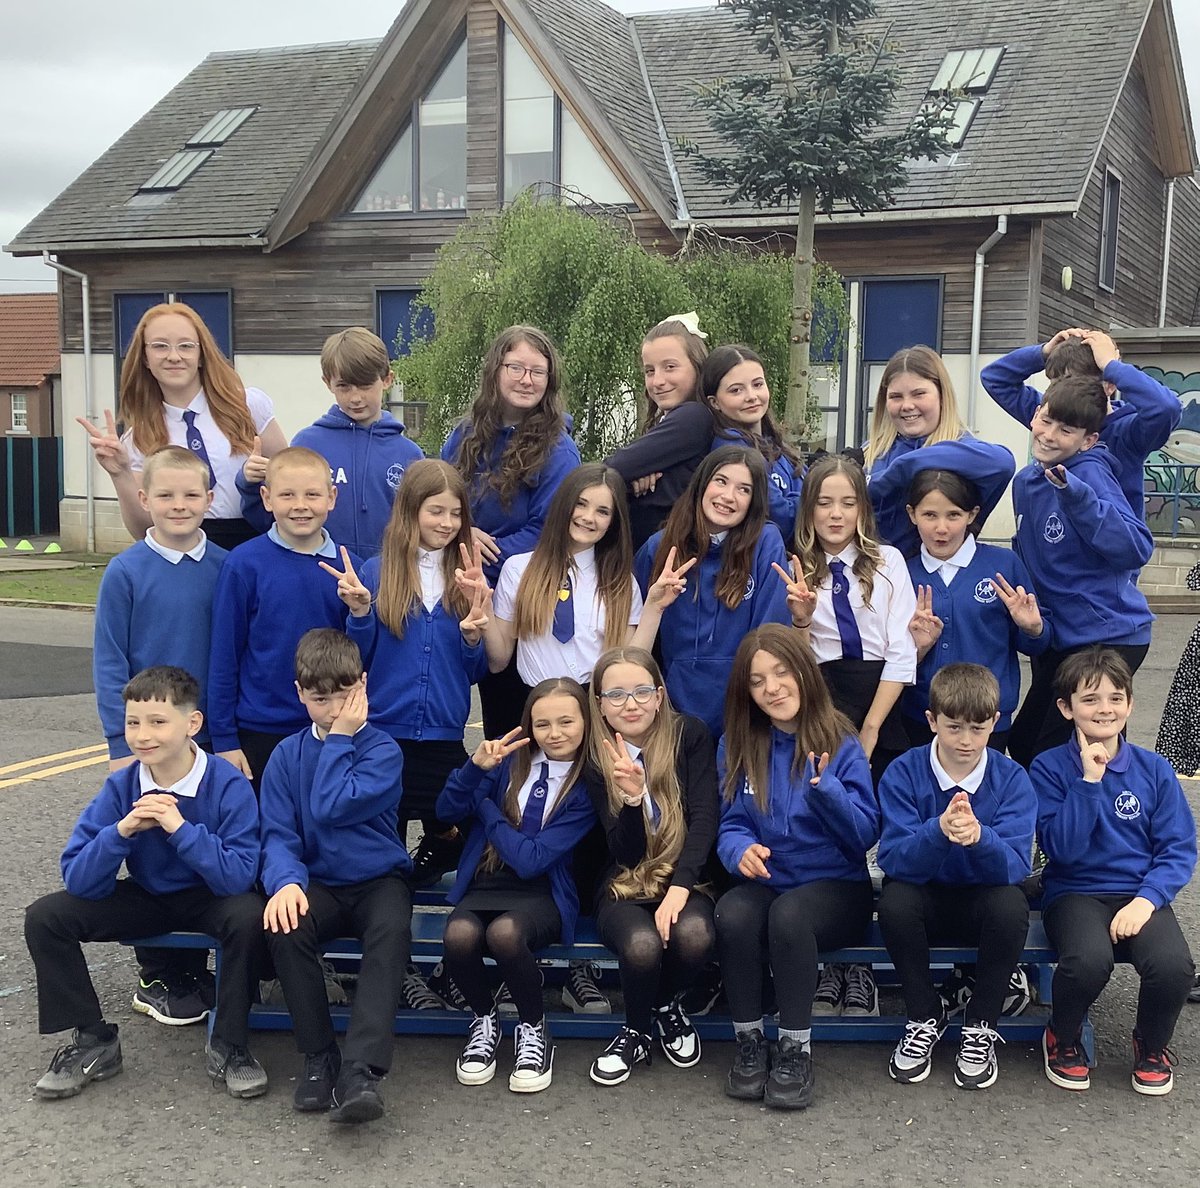 To finish off the week, P7 headed to LHS for their transition days 🤩 I look forward to hearing all about it next week! ☺️ @airthprimary @LarbertHigh